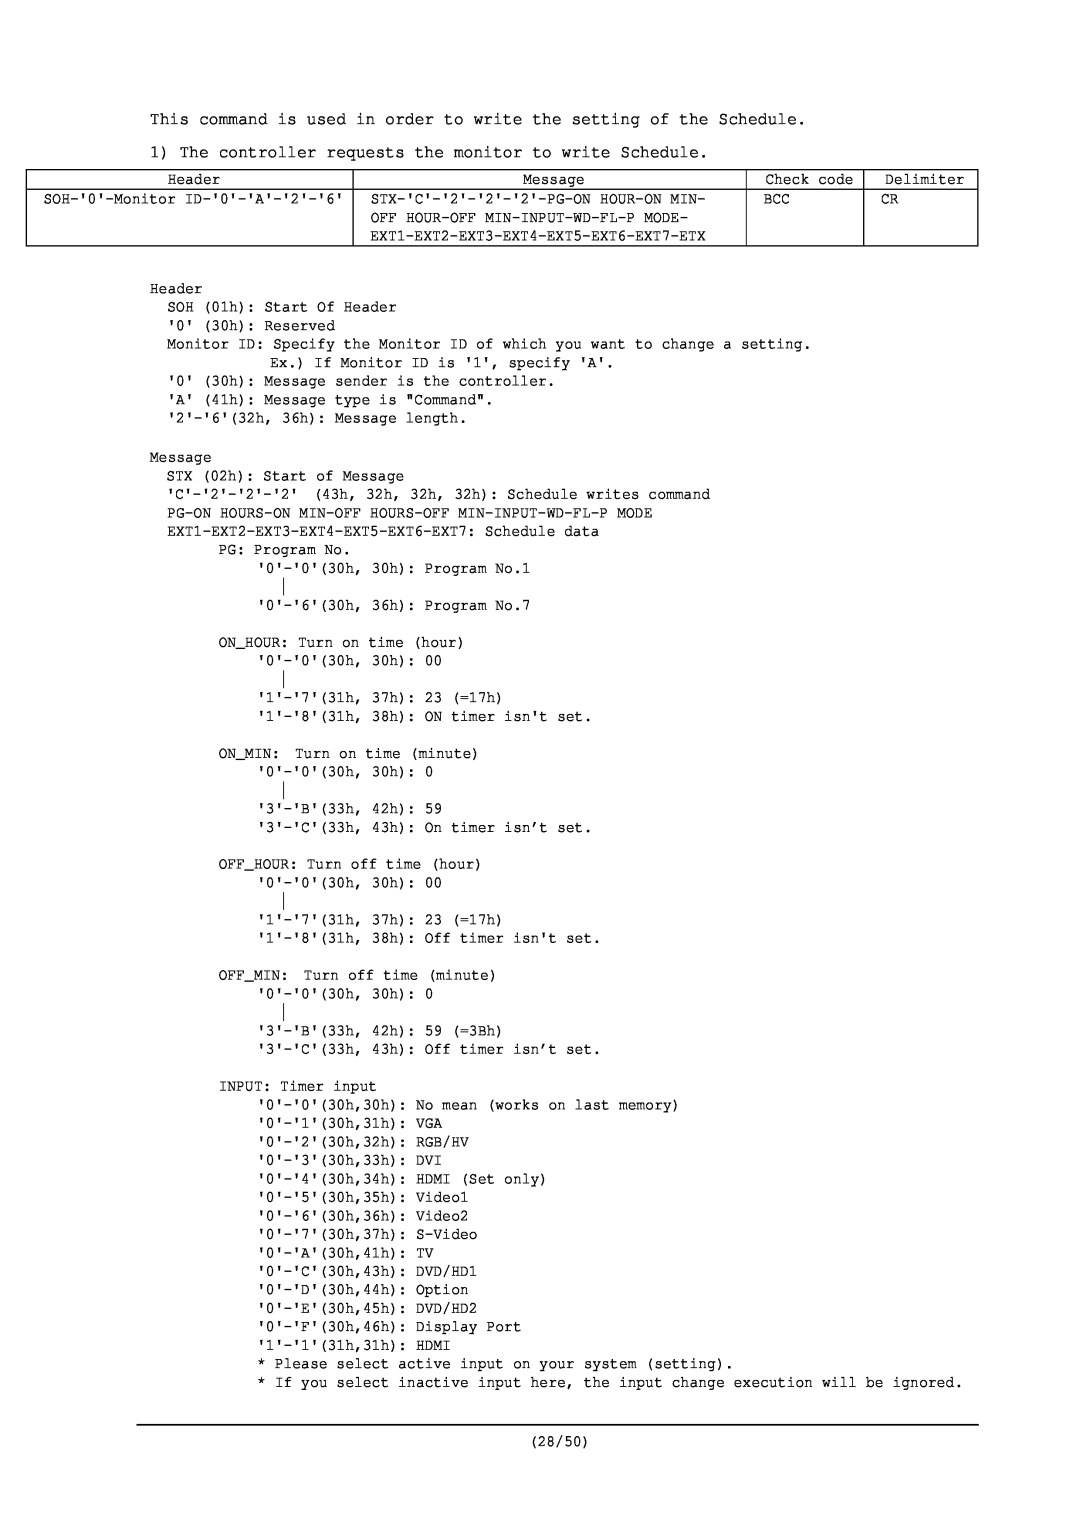 NEC RS-232C user manual This command is used in order to write the setting of the Schedule 